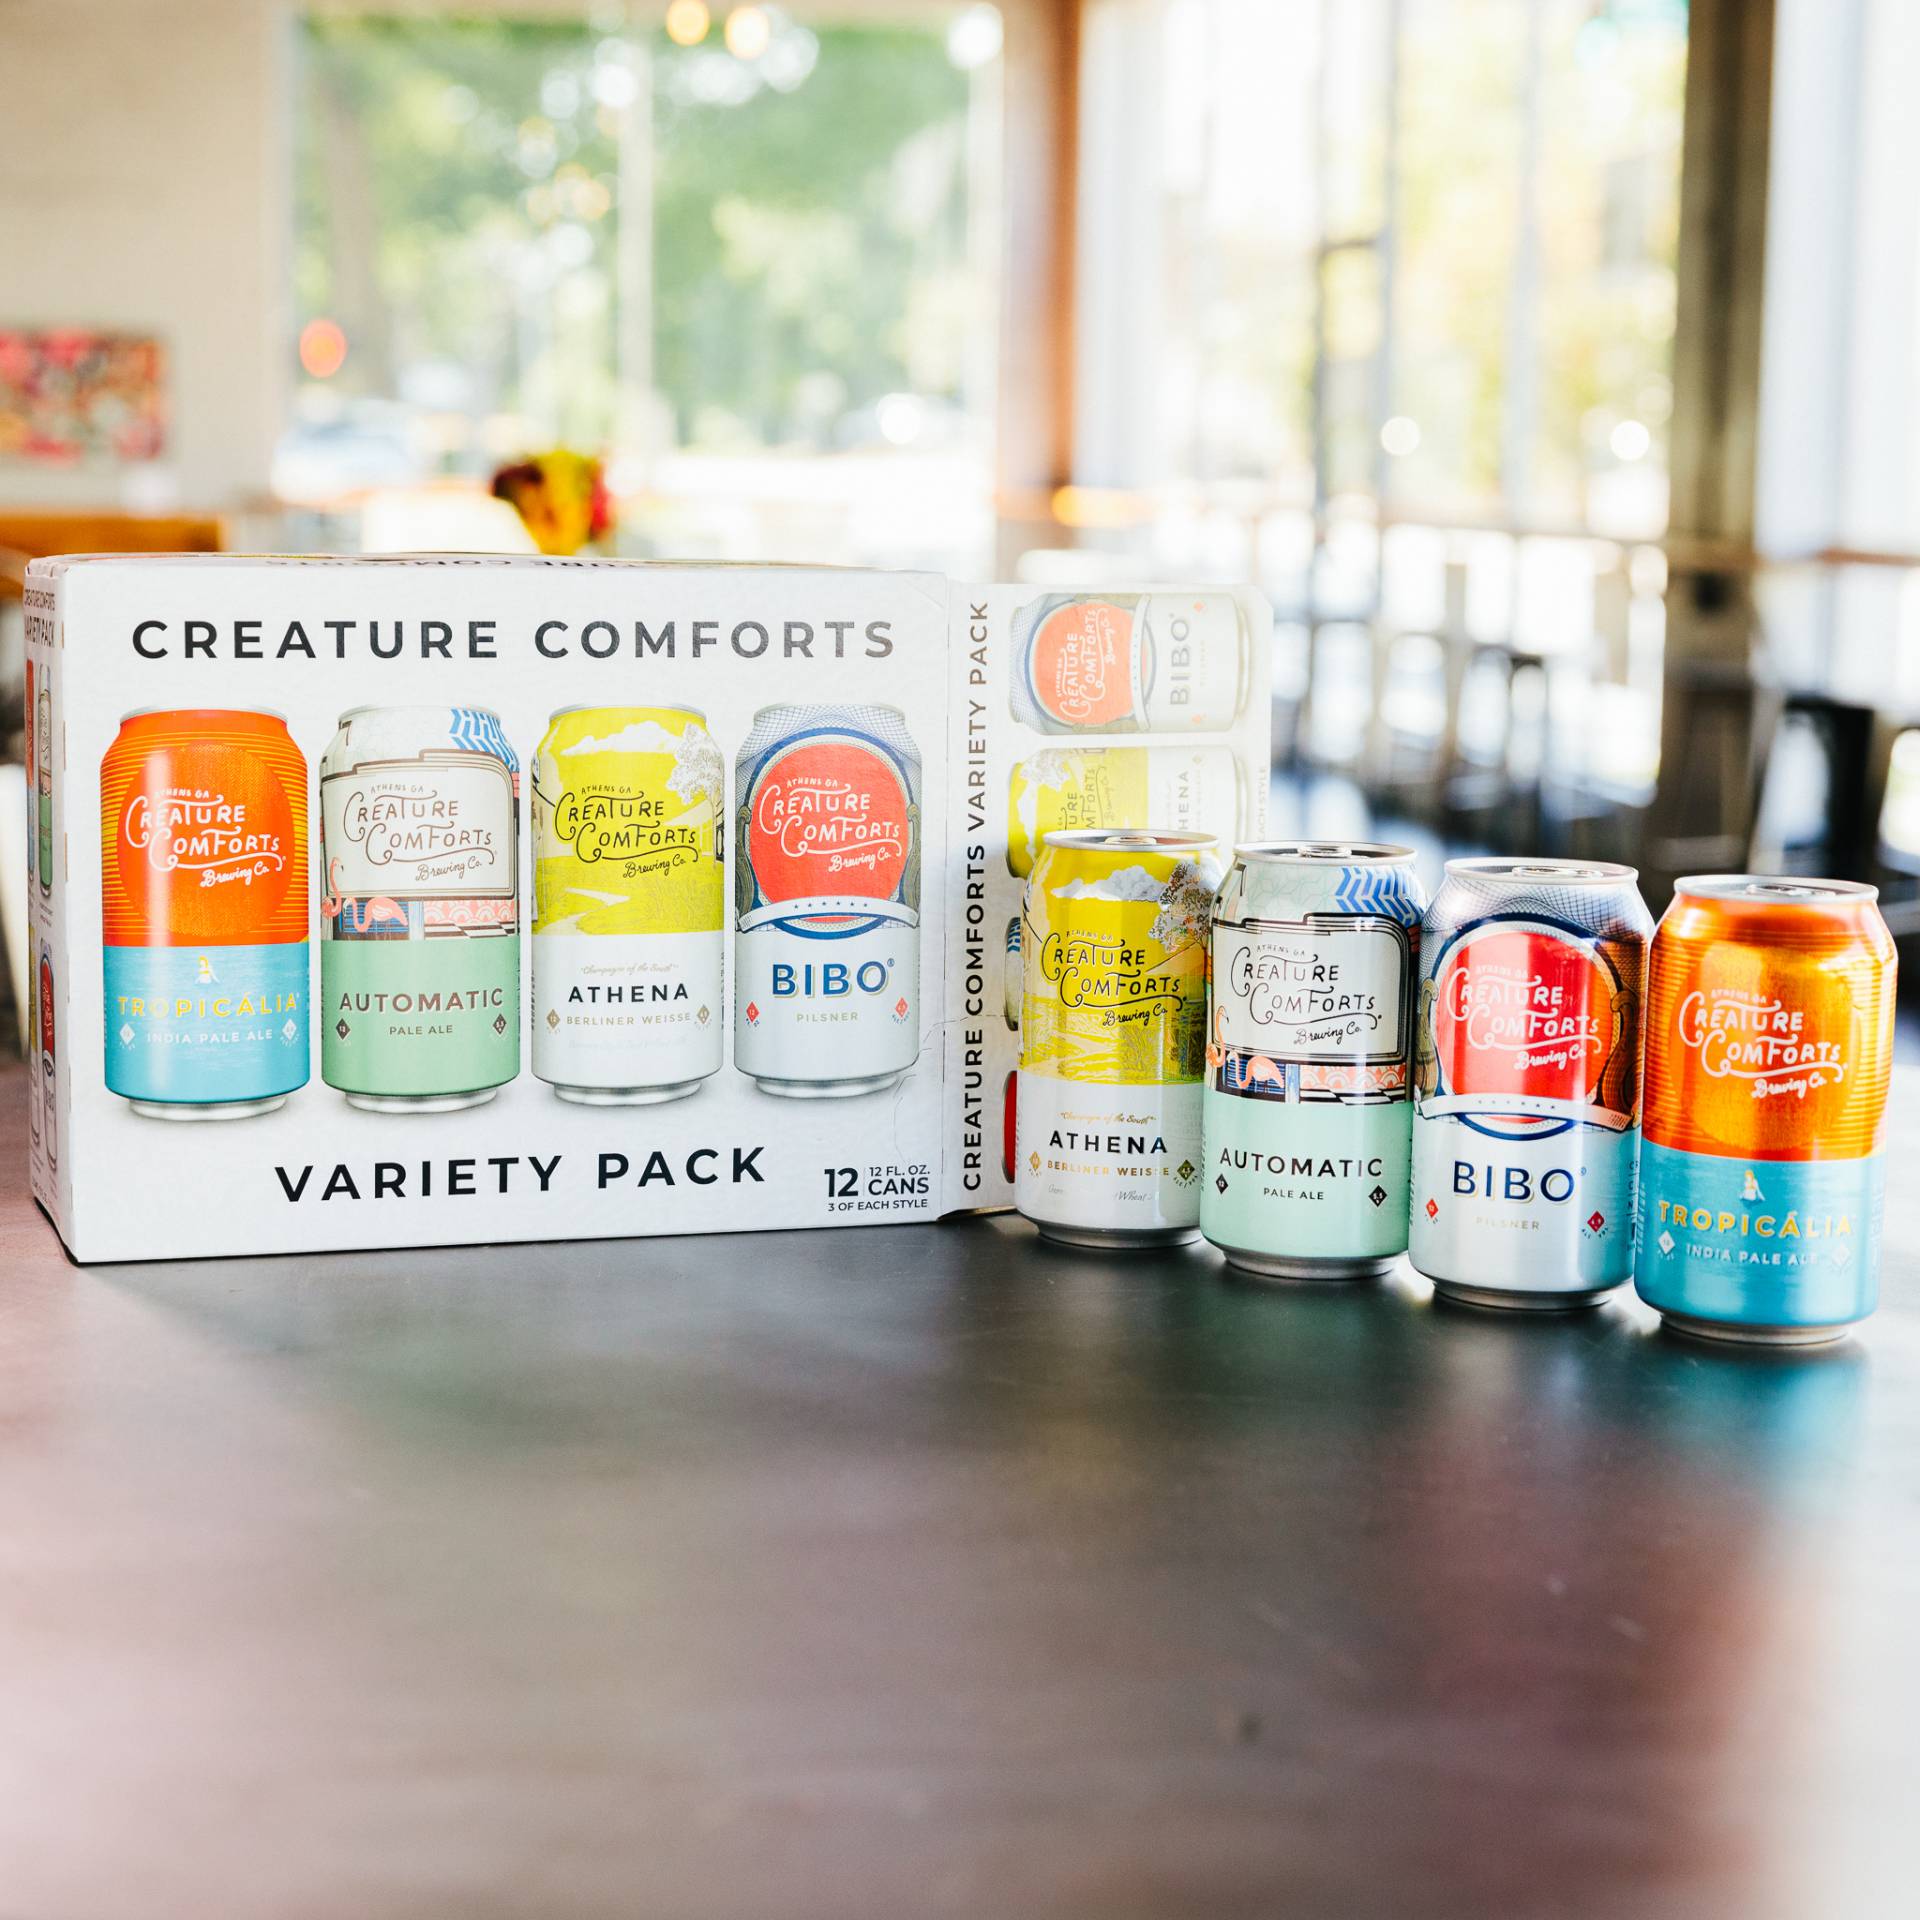 Creature Comforts Variety Pack box and cans